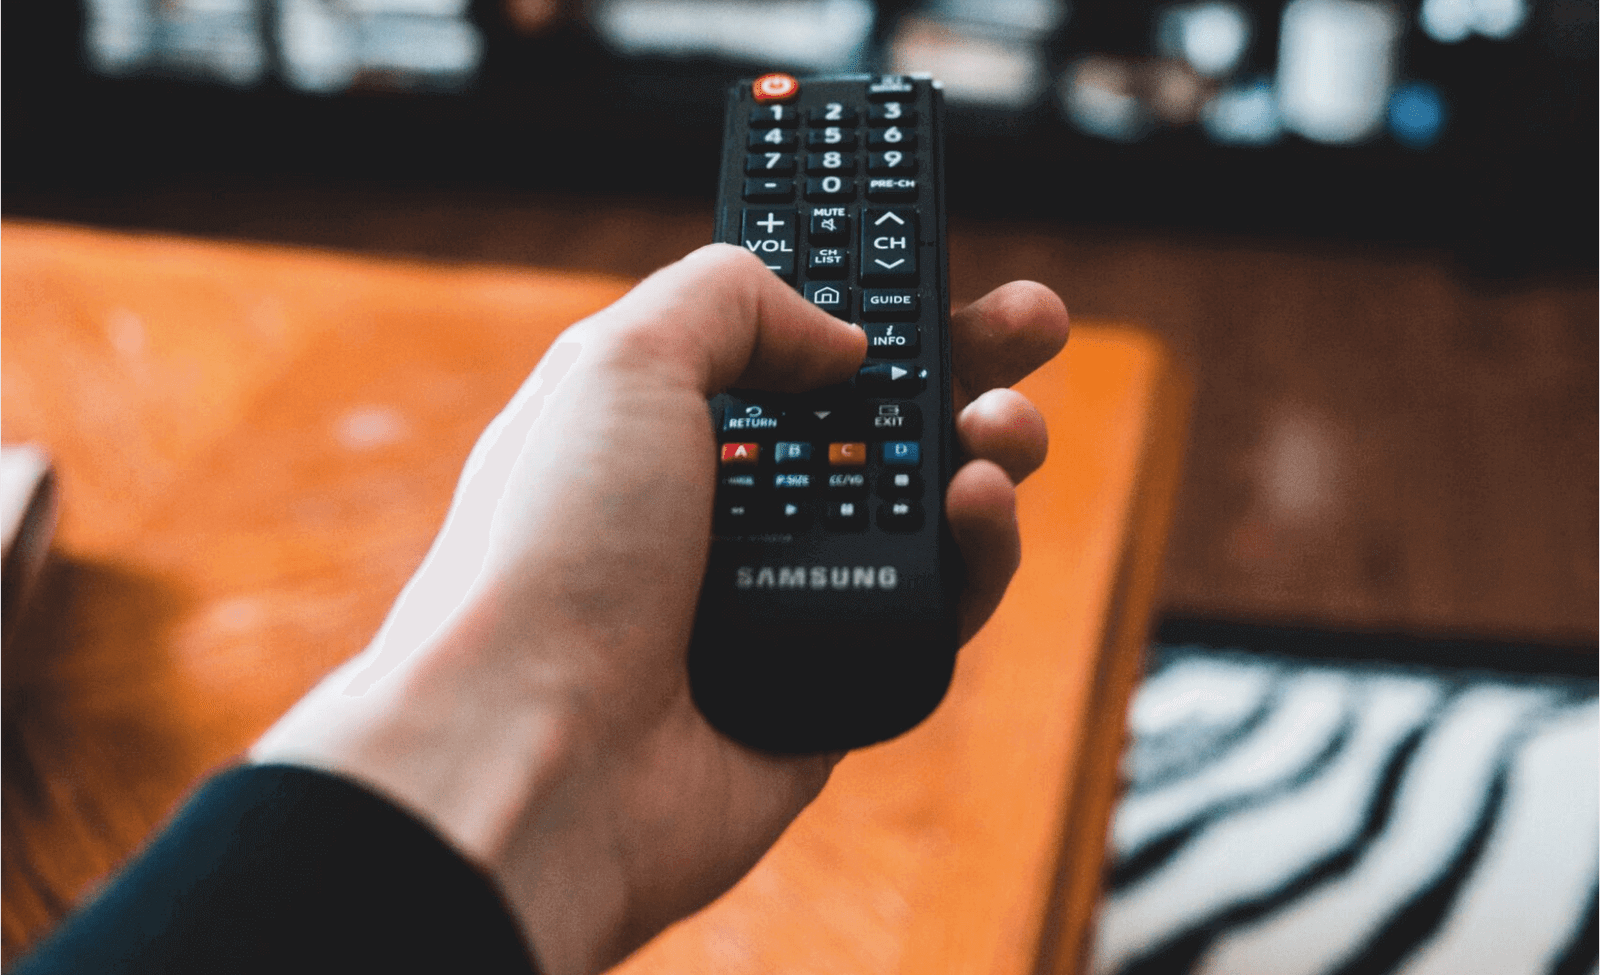 How To Restart Samsung Smart TV - TV To Talk About